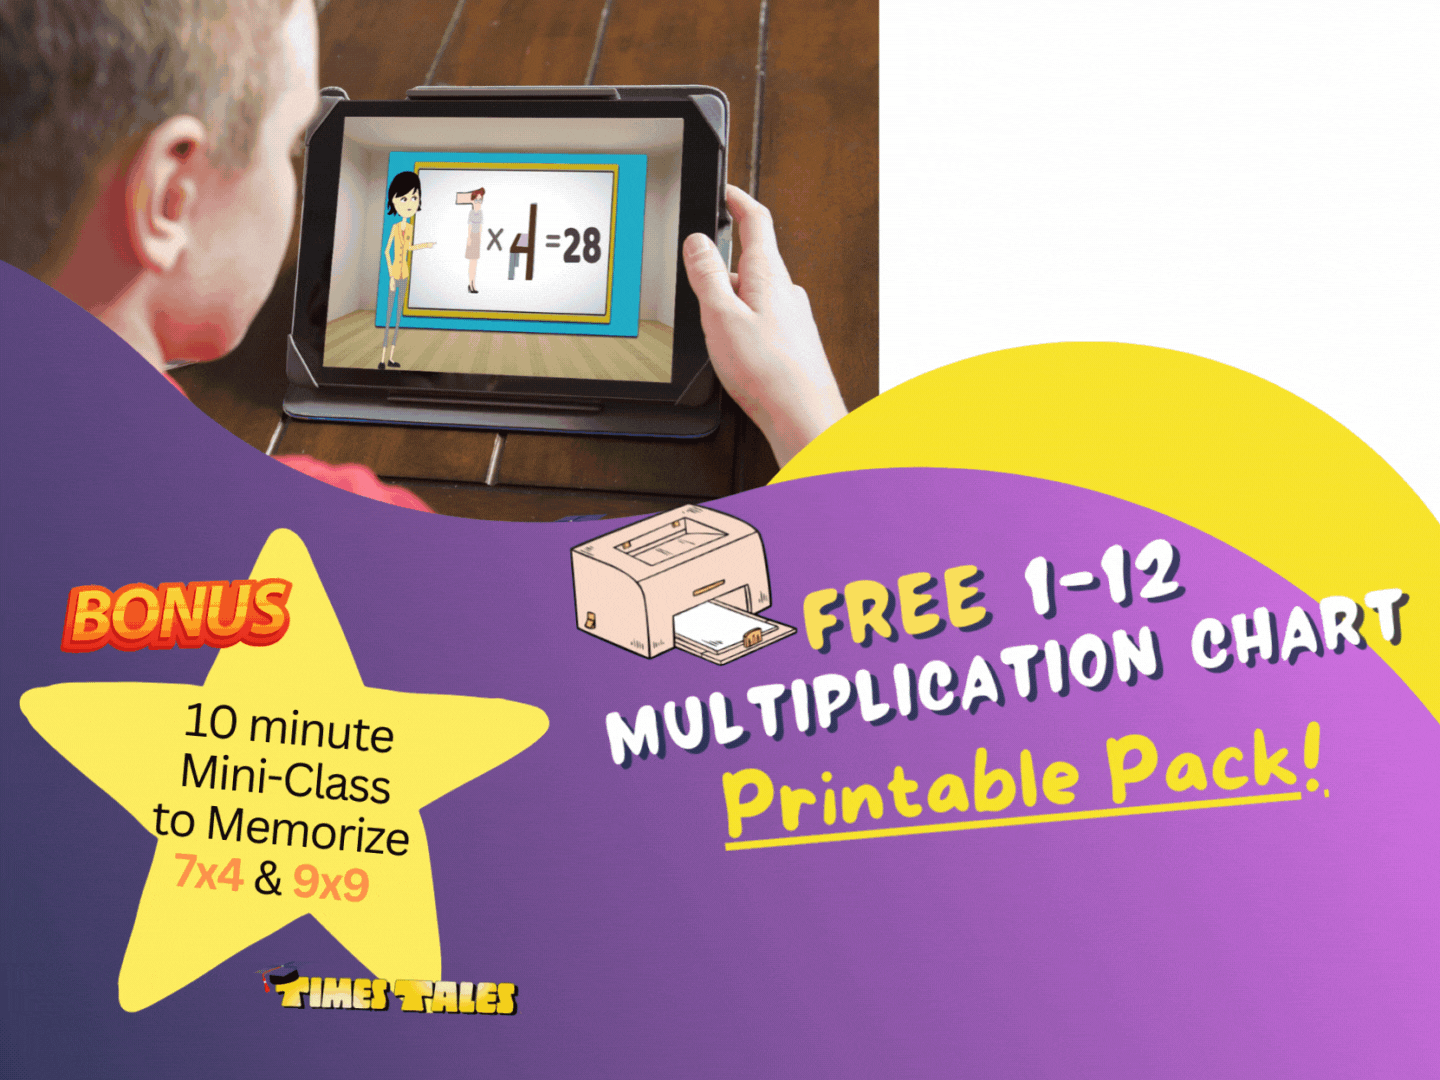 Text Free 1-12 multiplication chart printable pack. Boy looking at computer learning 7x4 times tables.